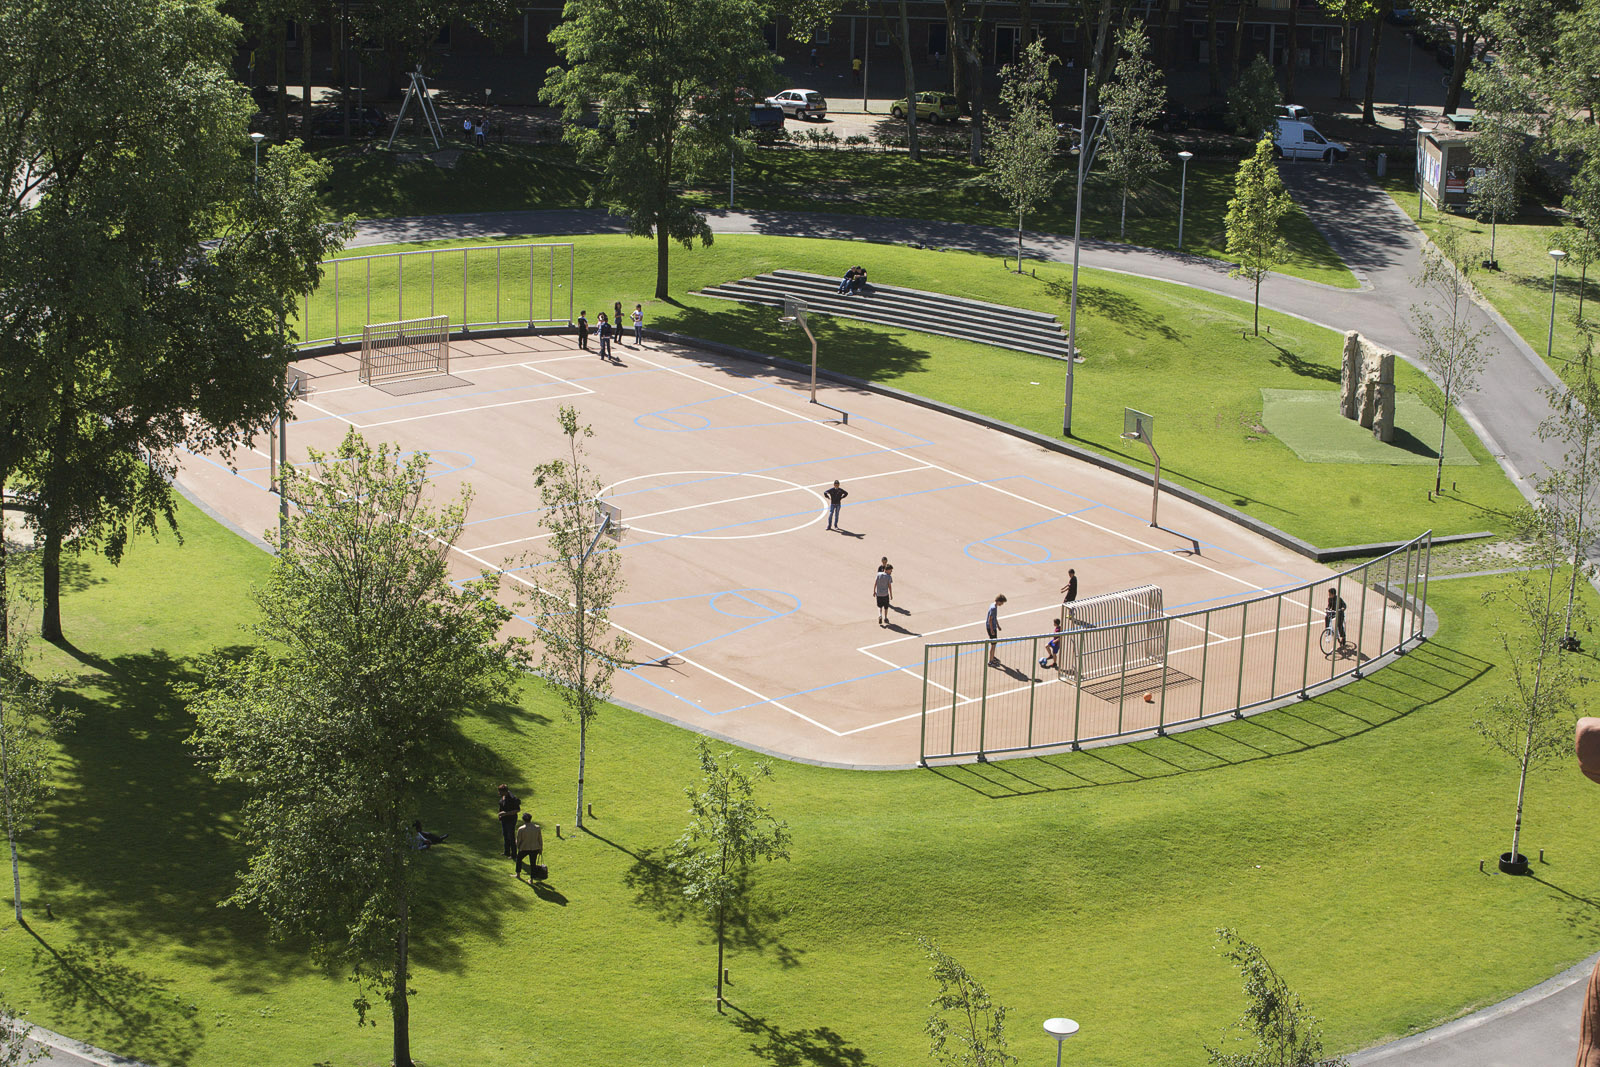 Sporting field, climbing object, stand, playing facilities and a multi functional path